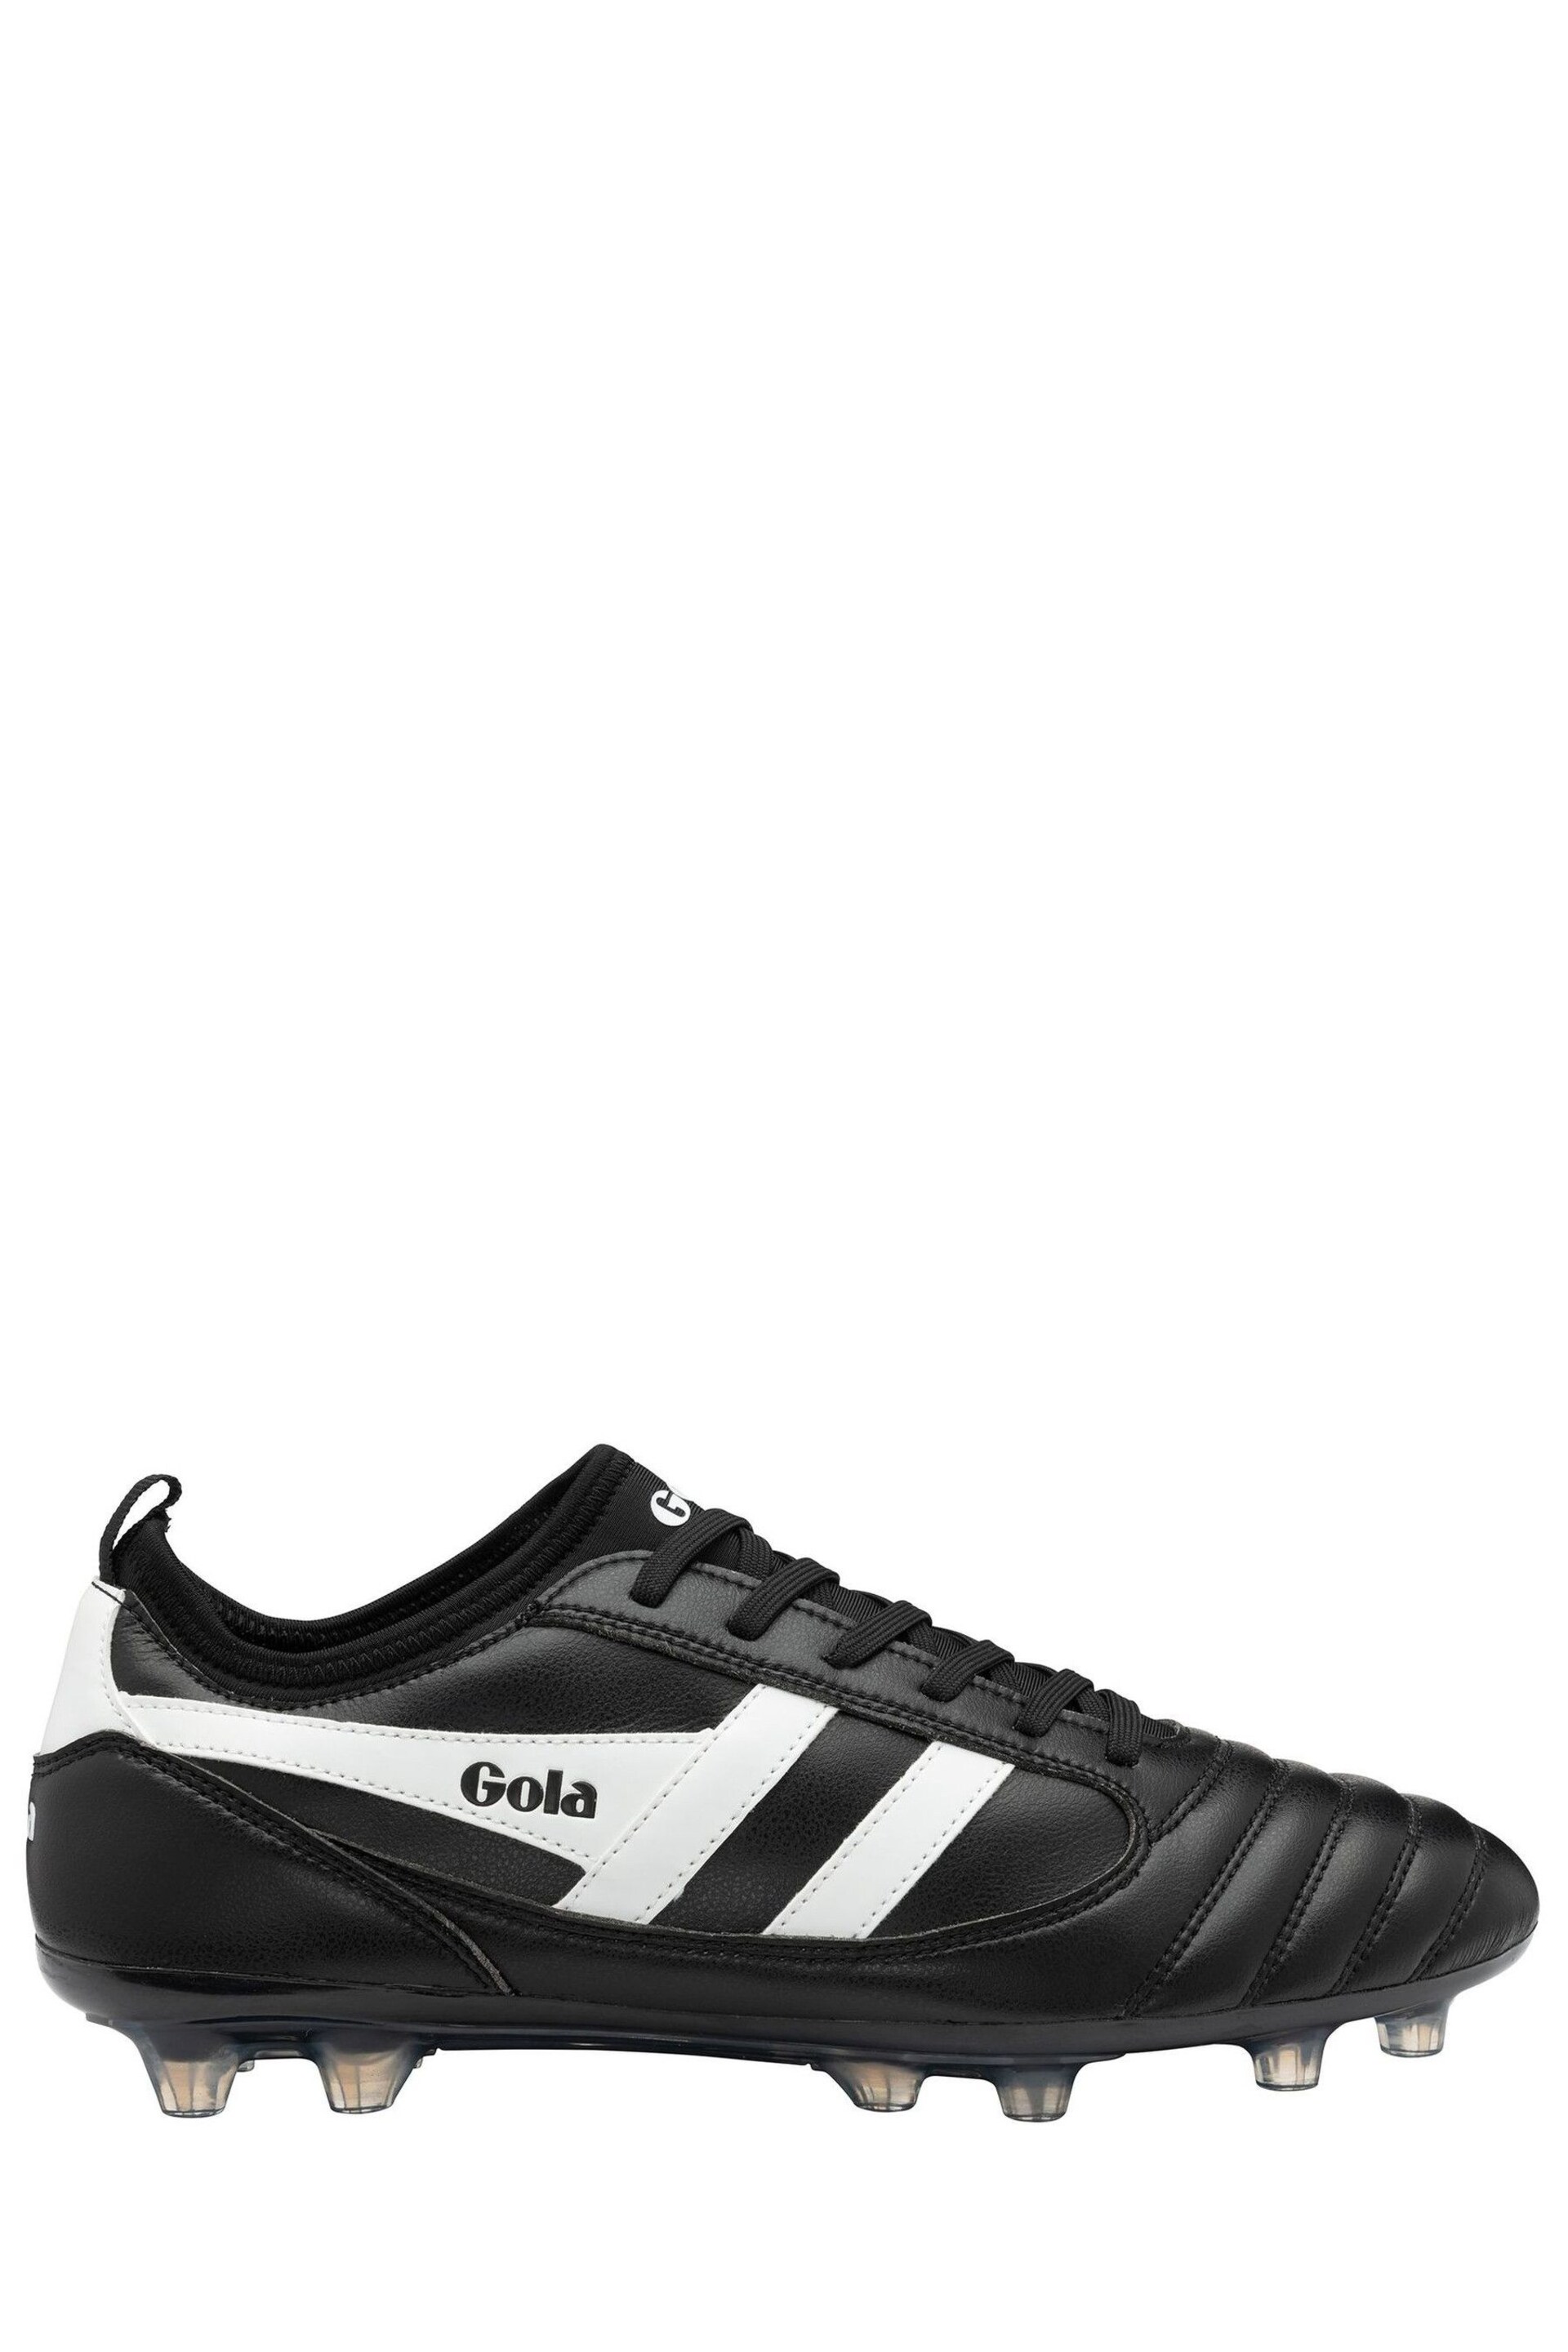 Gola Black Juniors Ceptor MLD Pro Microfibre Lace-Up Football Boots - Image 1 of 5